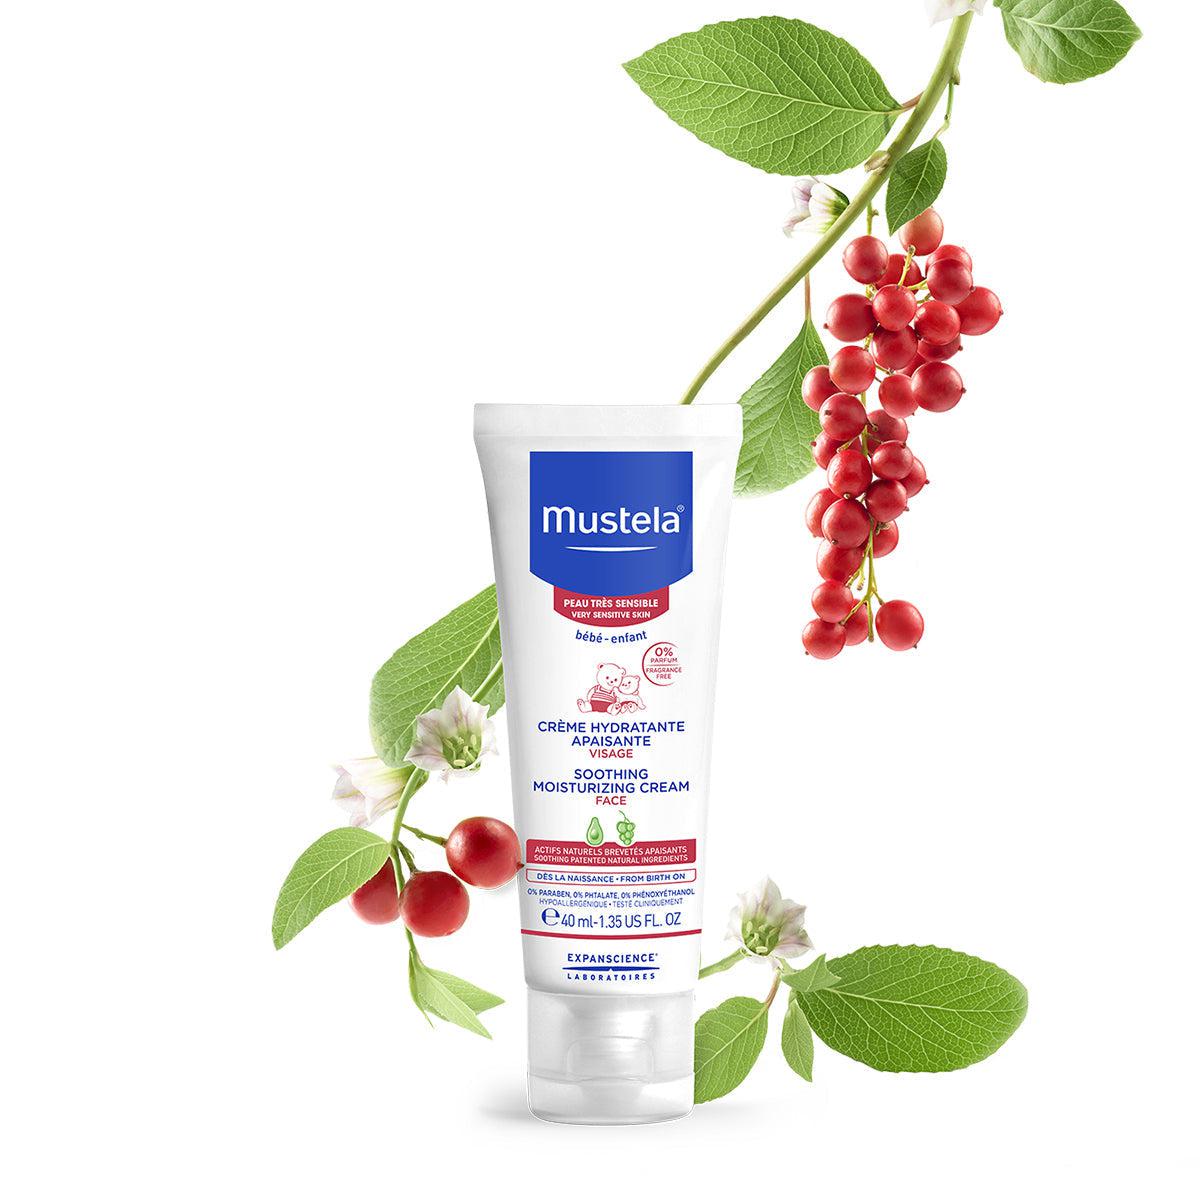 Mustela Soothing Moisturizing Cream 40ml- Lillys Pharmacy and Health Store